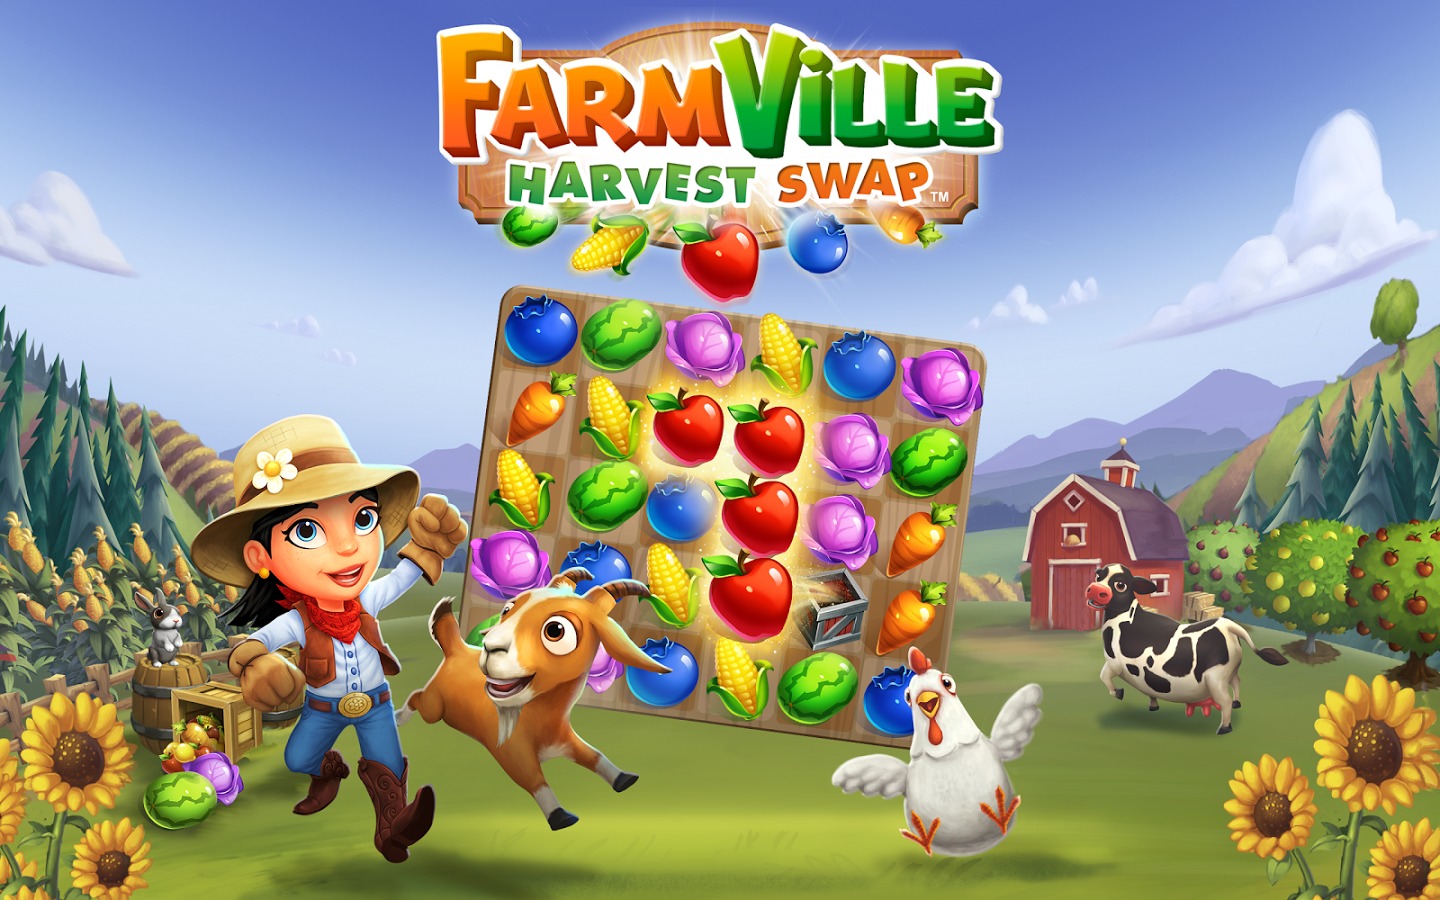 FarmVille Ready To Harvest A New Crop Of Users With MSN Games